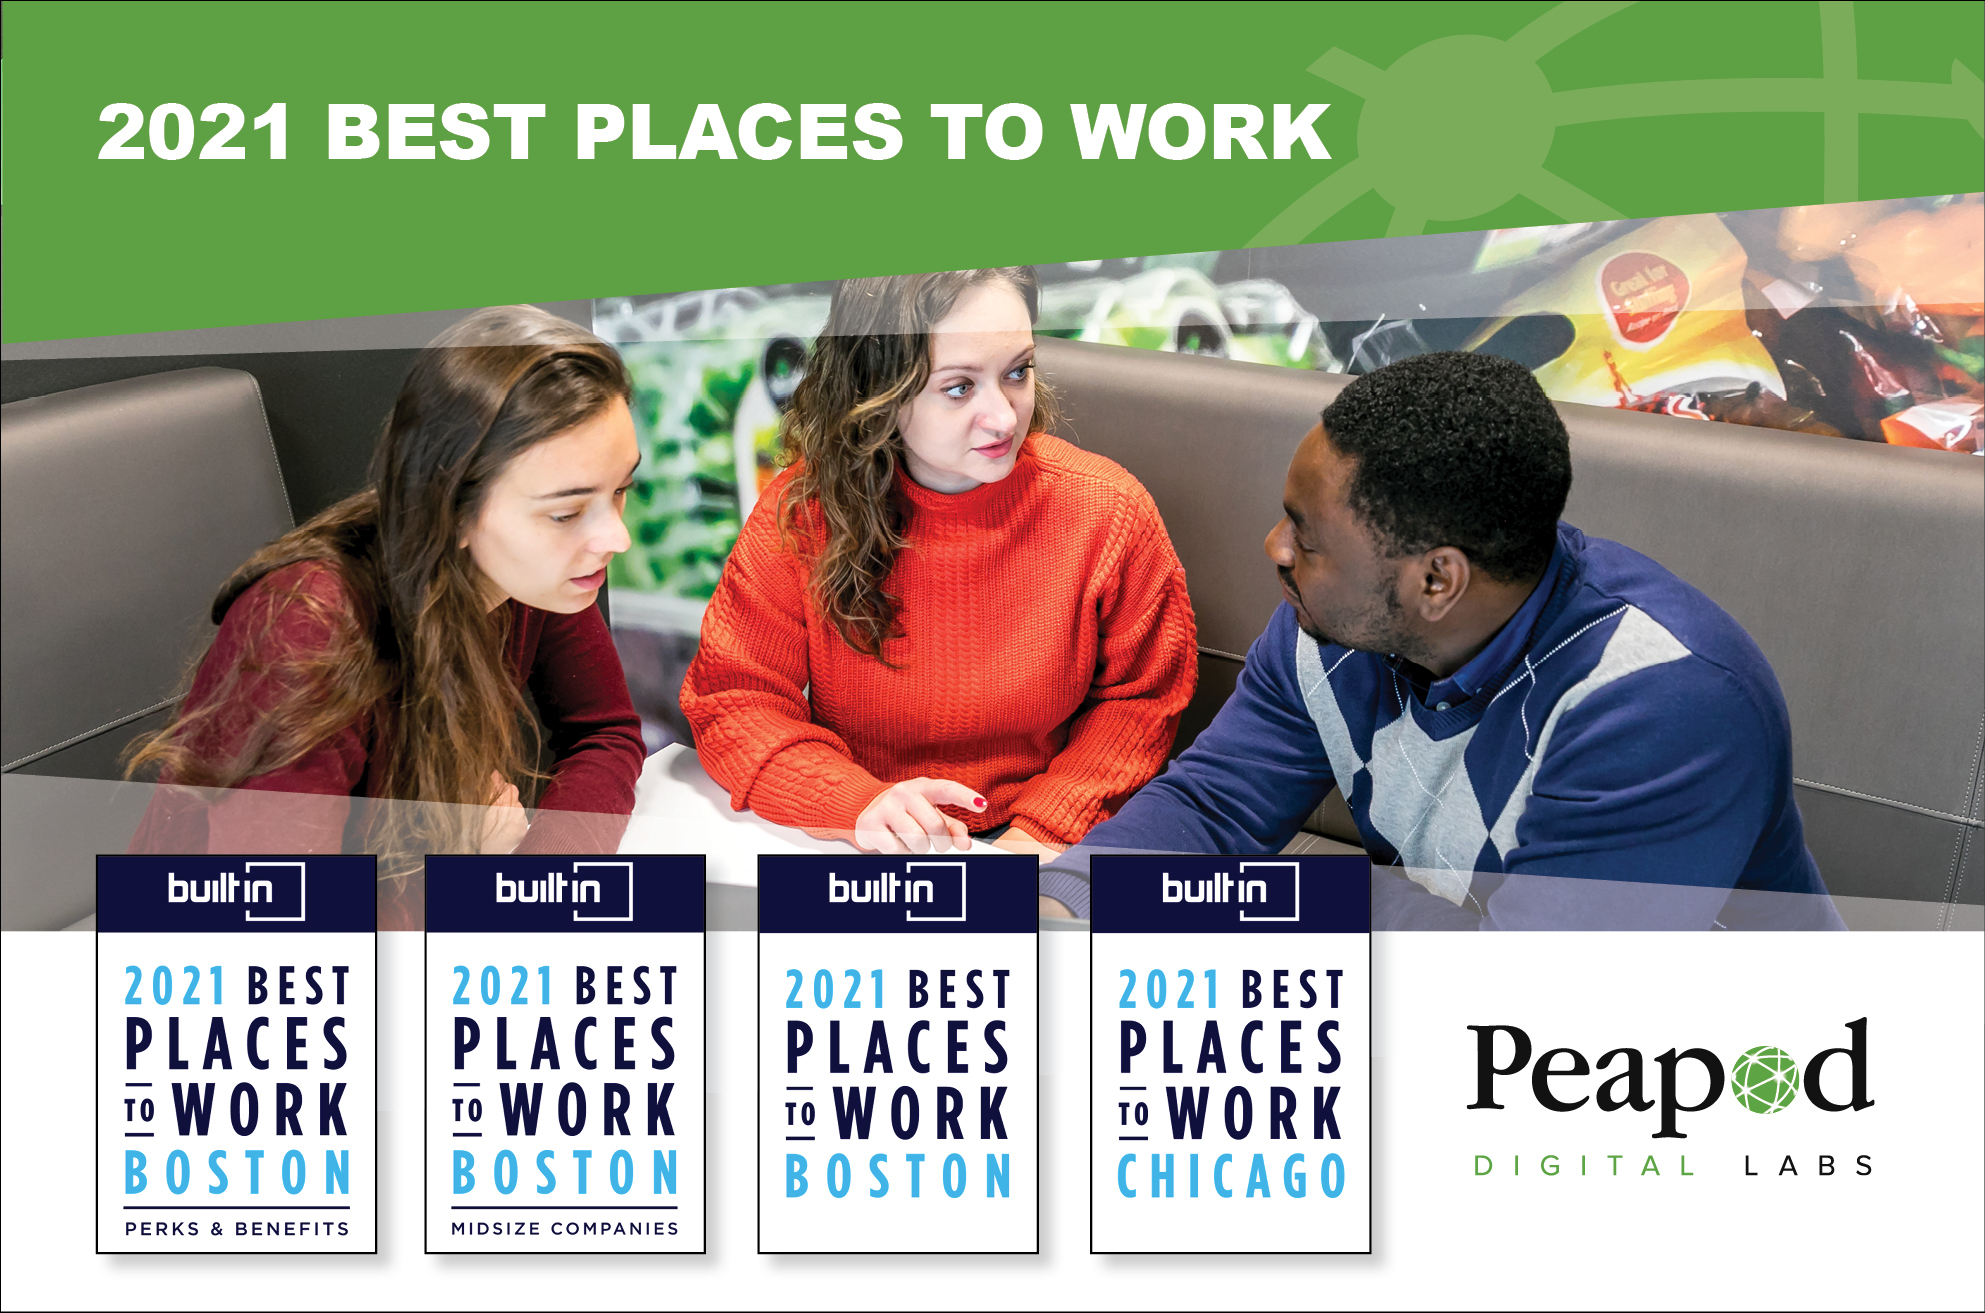 Our Built In Best Places to Work Awards